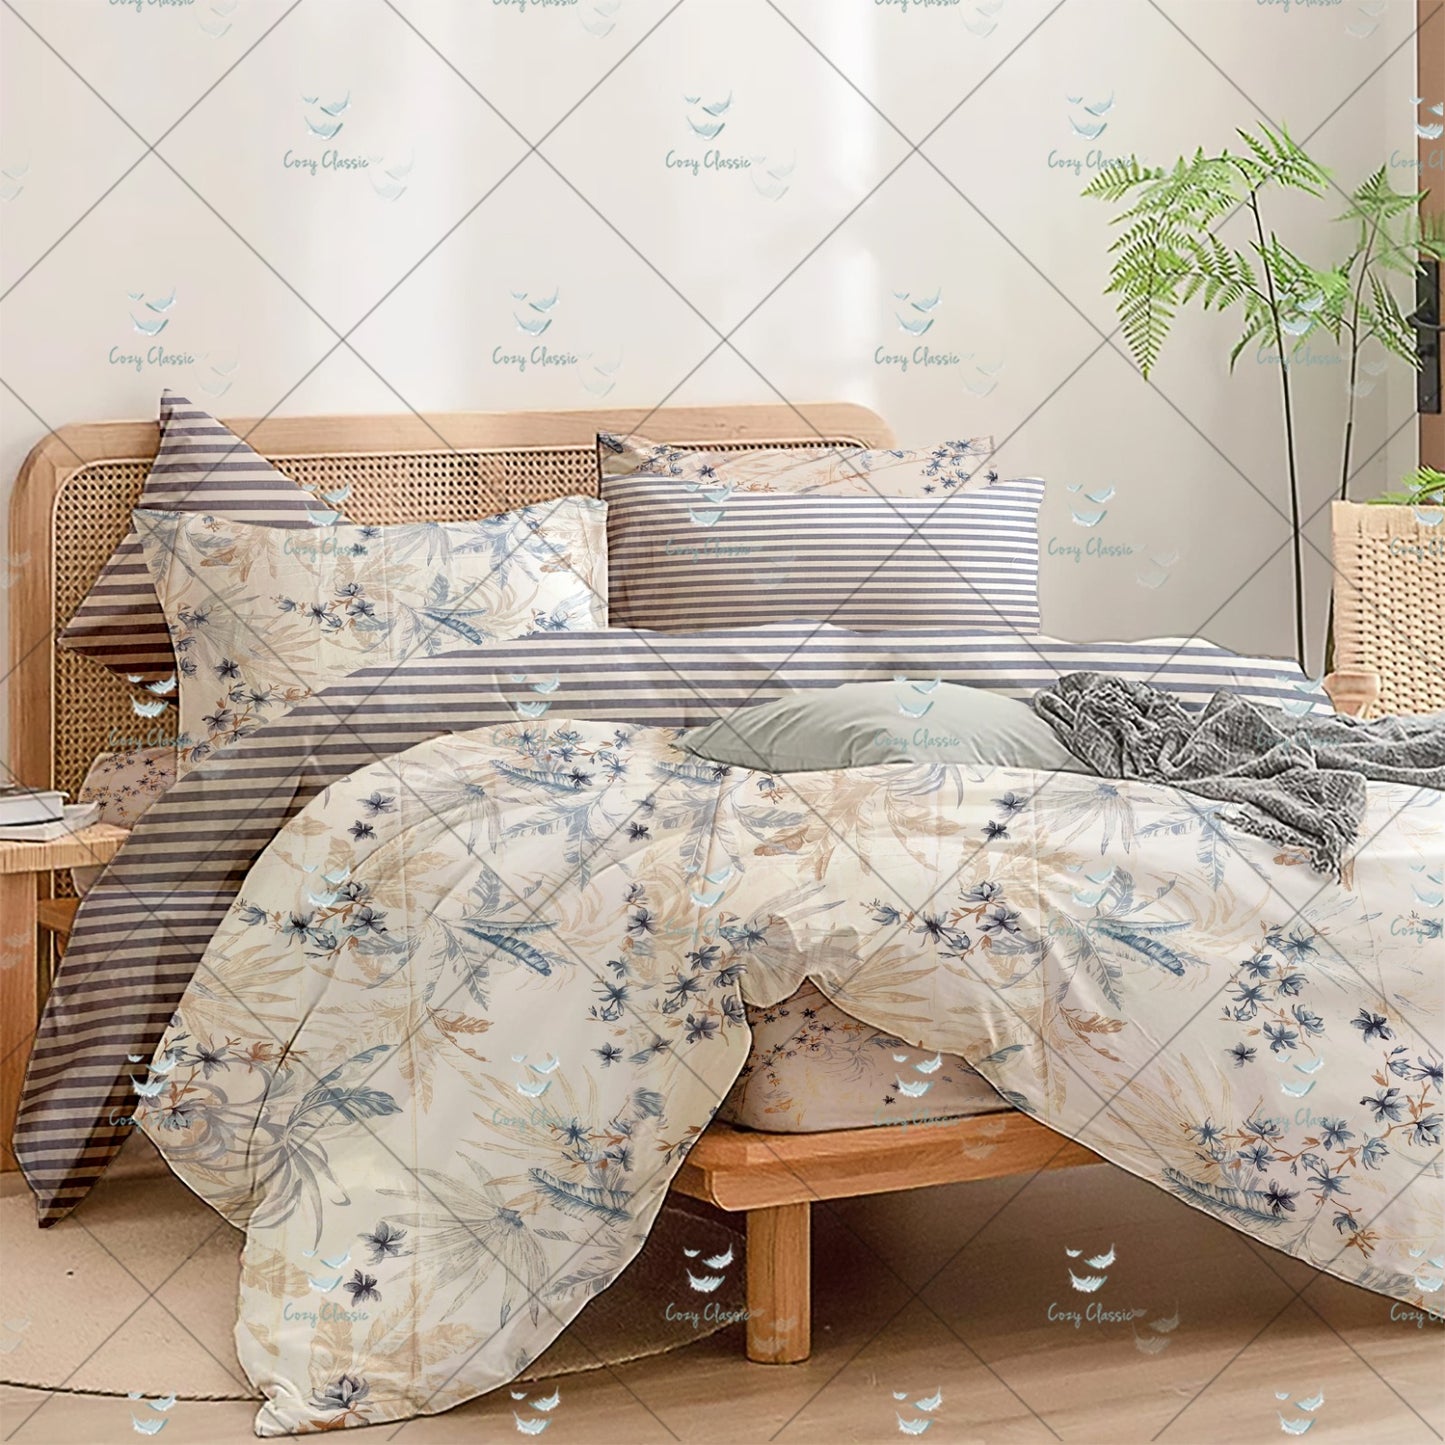 Pattren With Floral Ornament Bedsheet and Duvet Cover Set